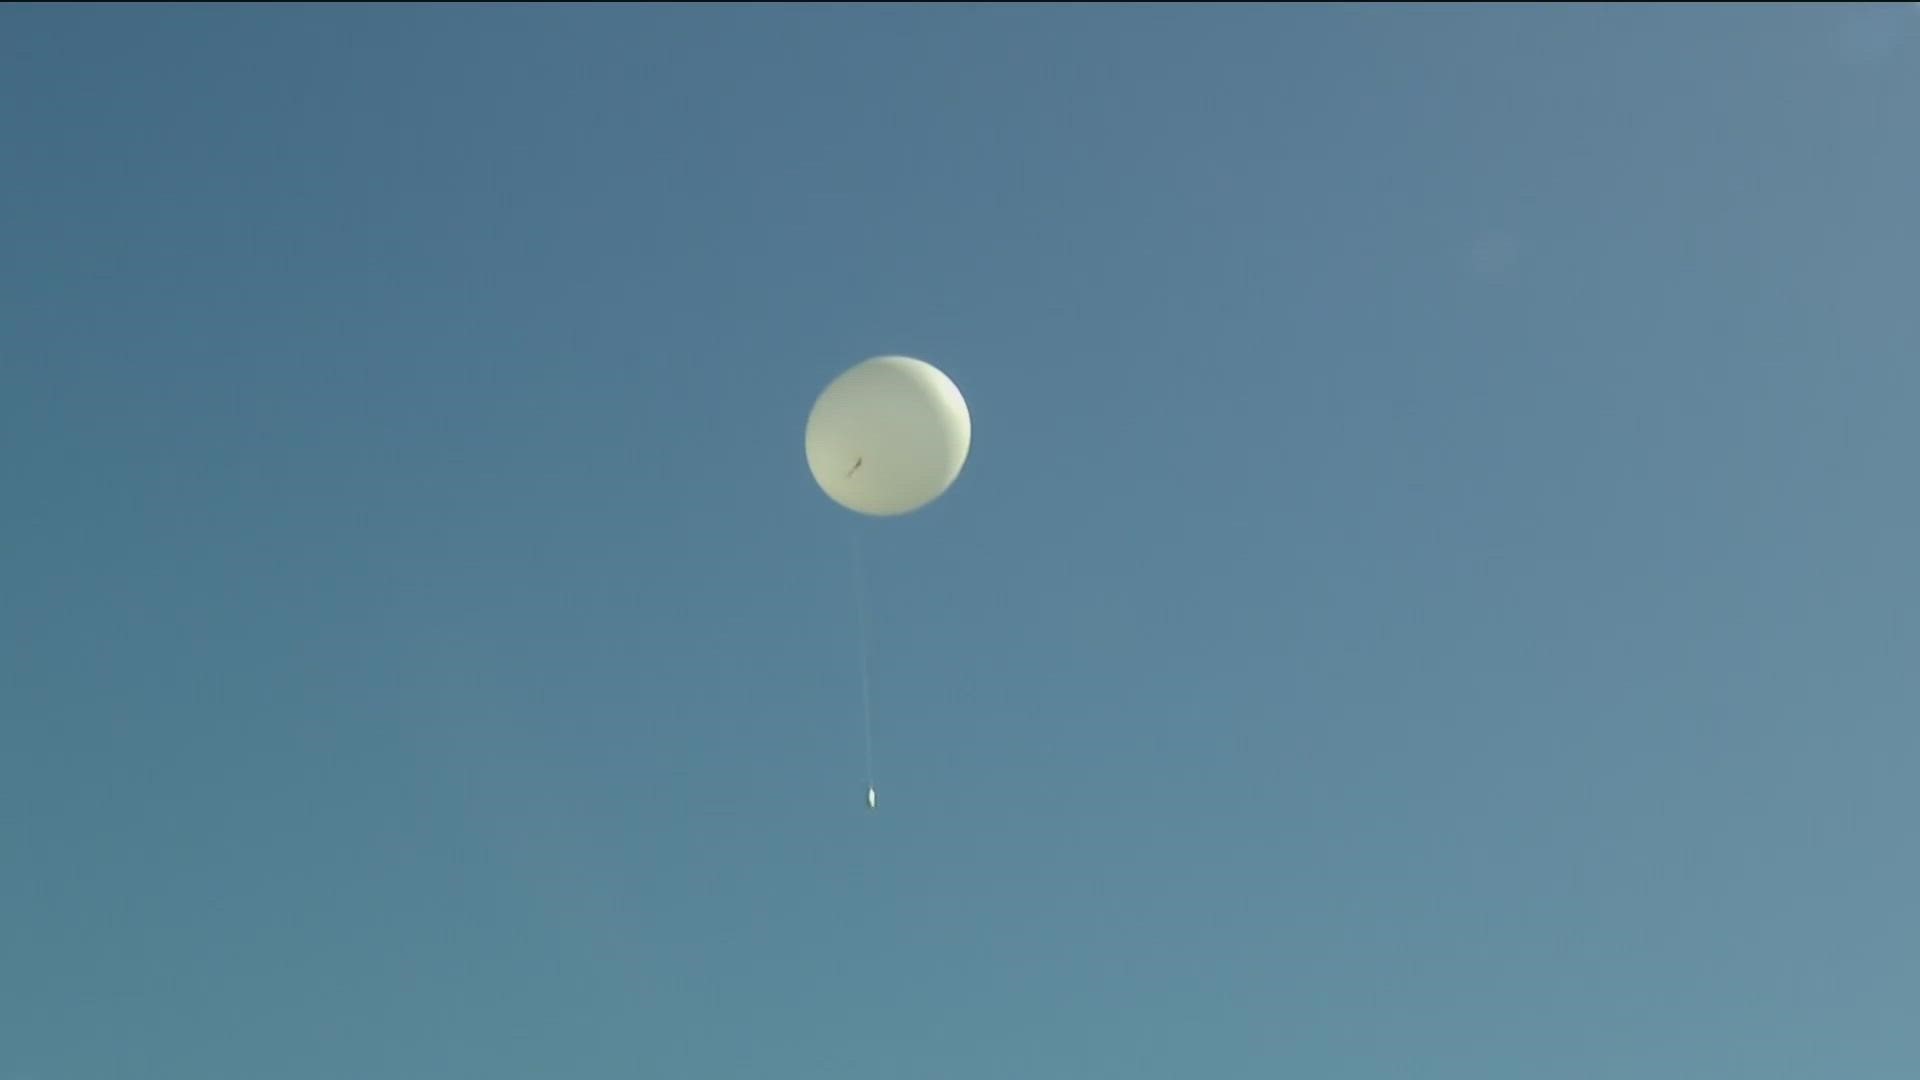 Scripps Institution of Oceanography scientists will be launching weather balloons to study the atmosphere. Balloons usually last a day before popping.